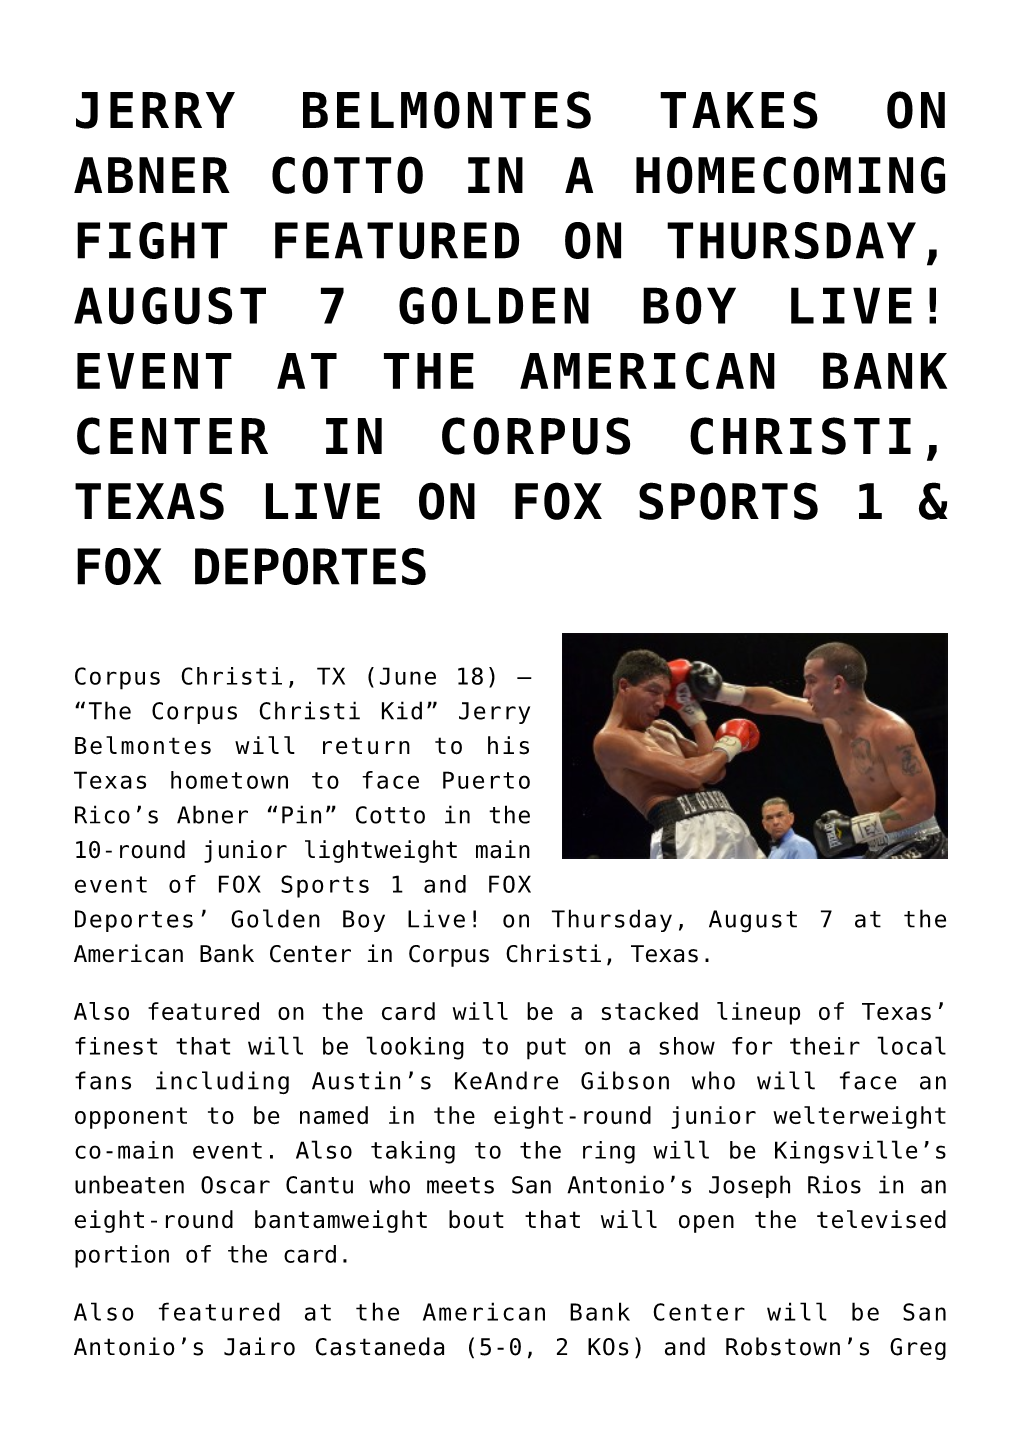 Jerry Belmontes Takes on Abner Cotto in A